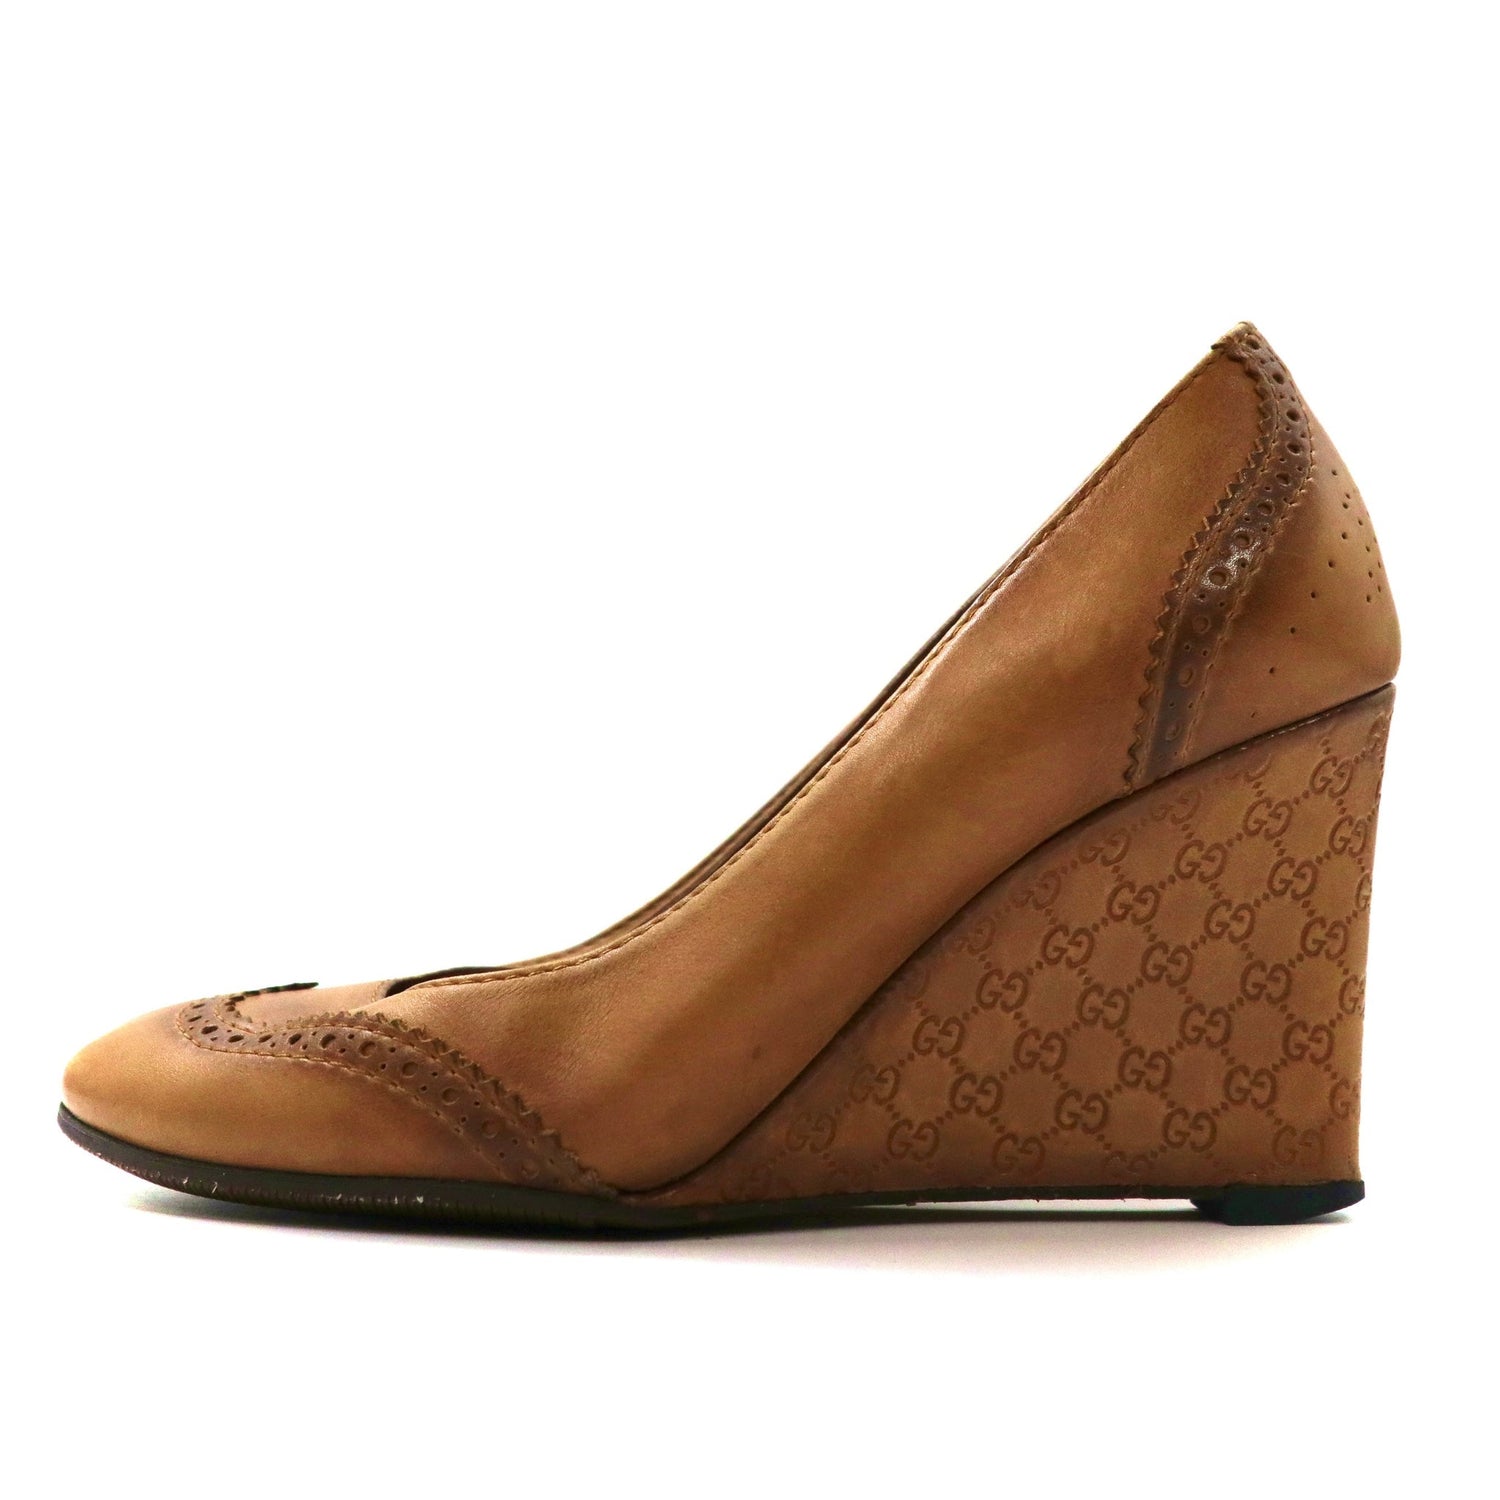 GUCCI wedge sole pumps US6.5 Brown leather GG pattern 297212